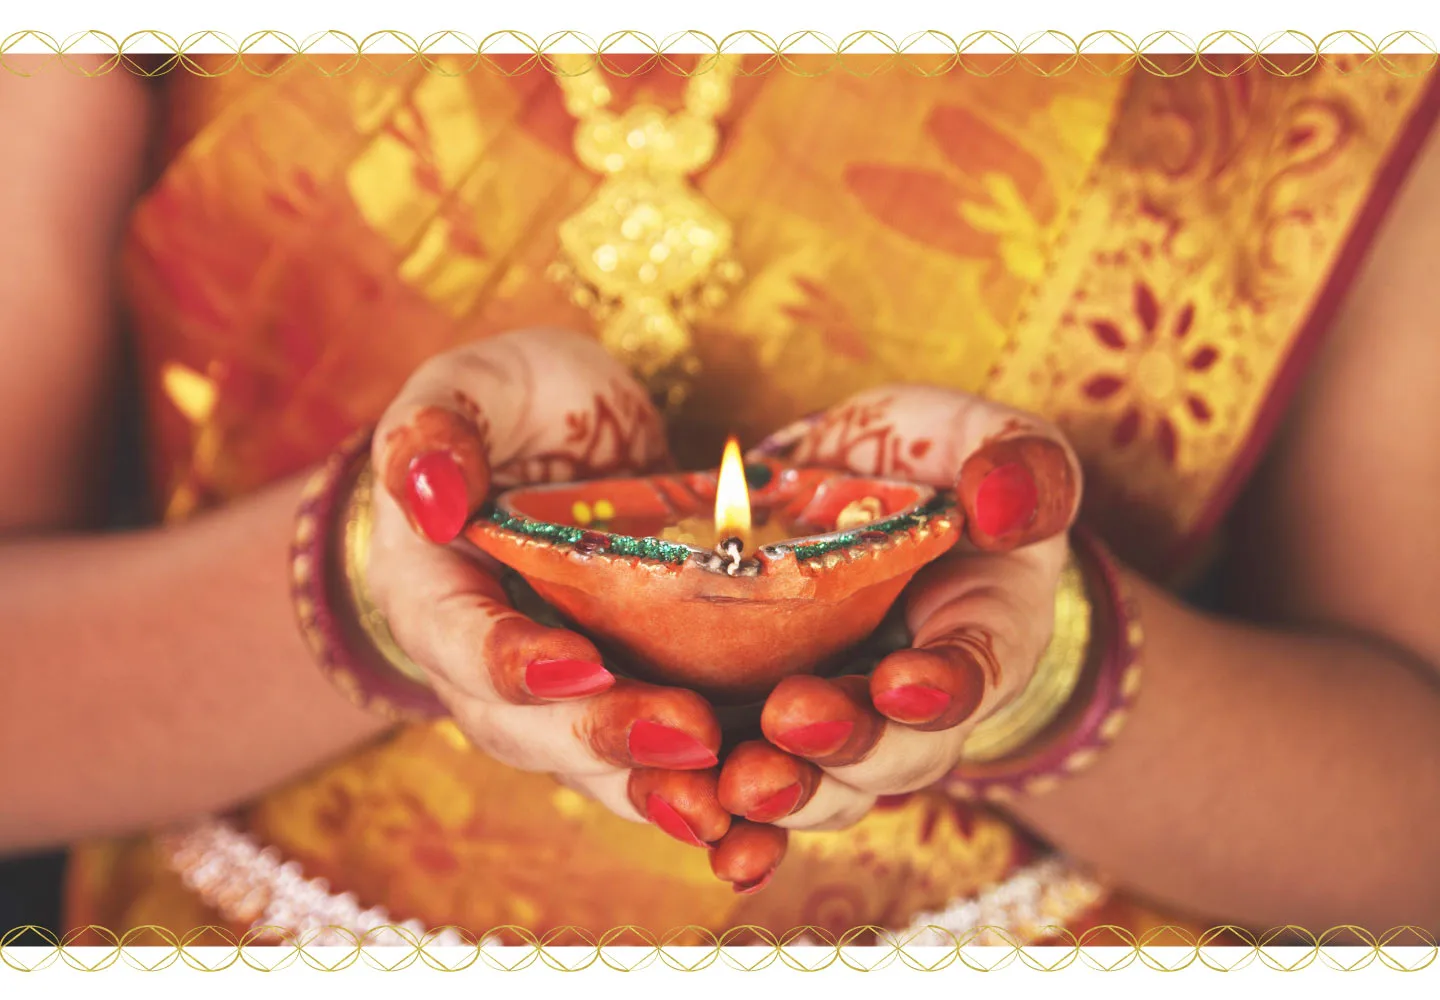 Diwali Greetings and Wishes